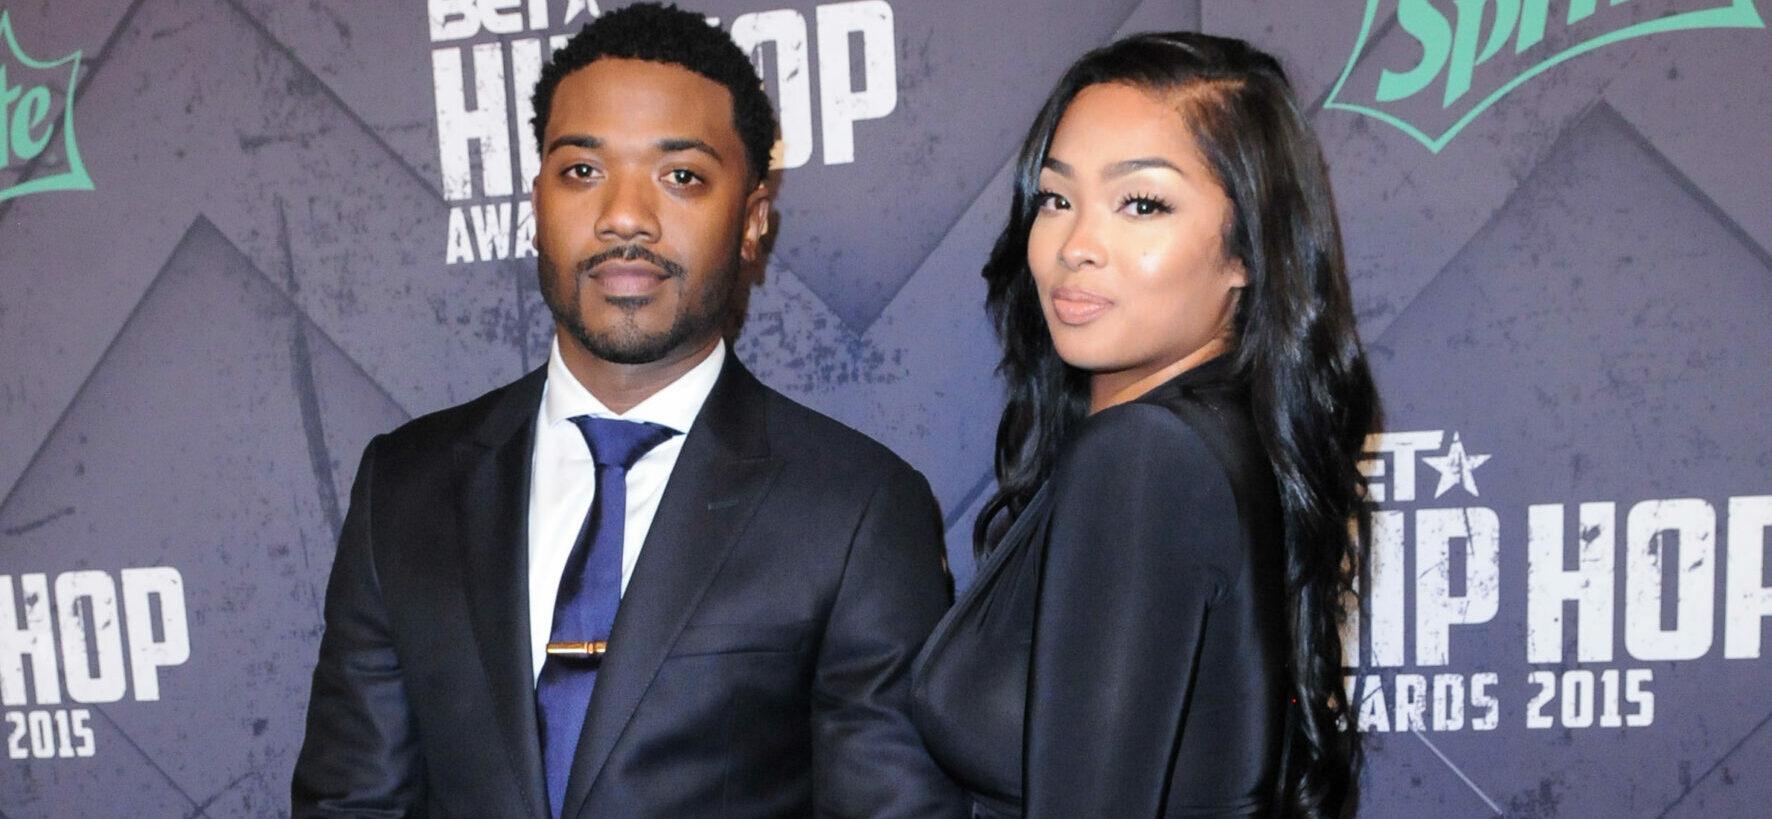 Singer Ray J Files For Joint Custody Of His Children With Princess Love